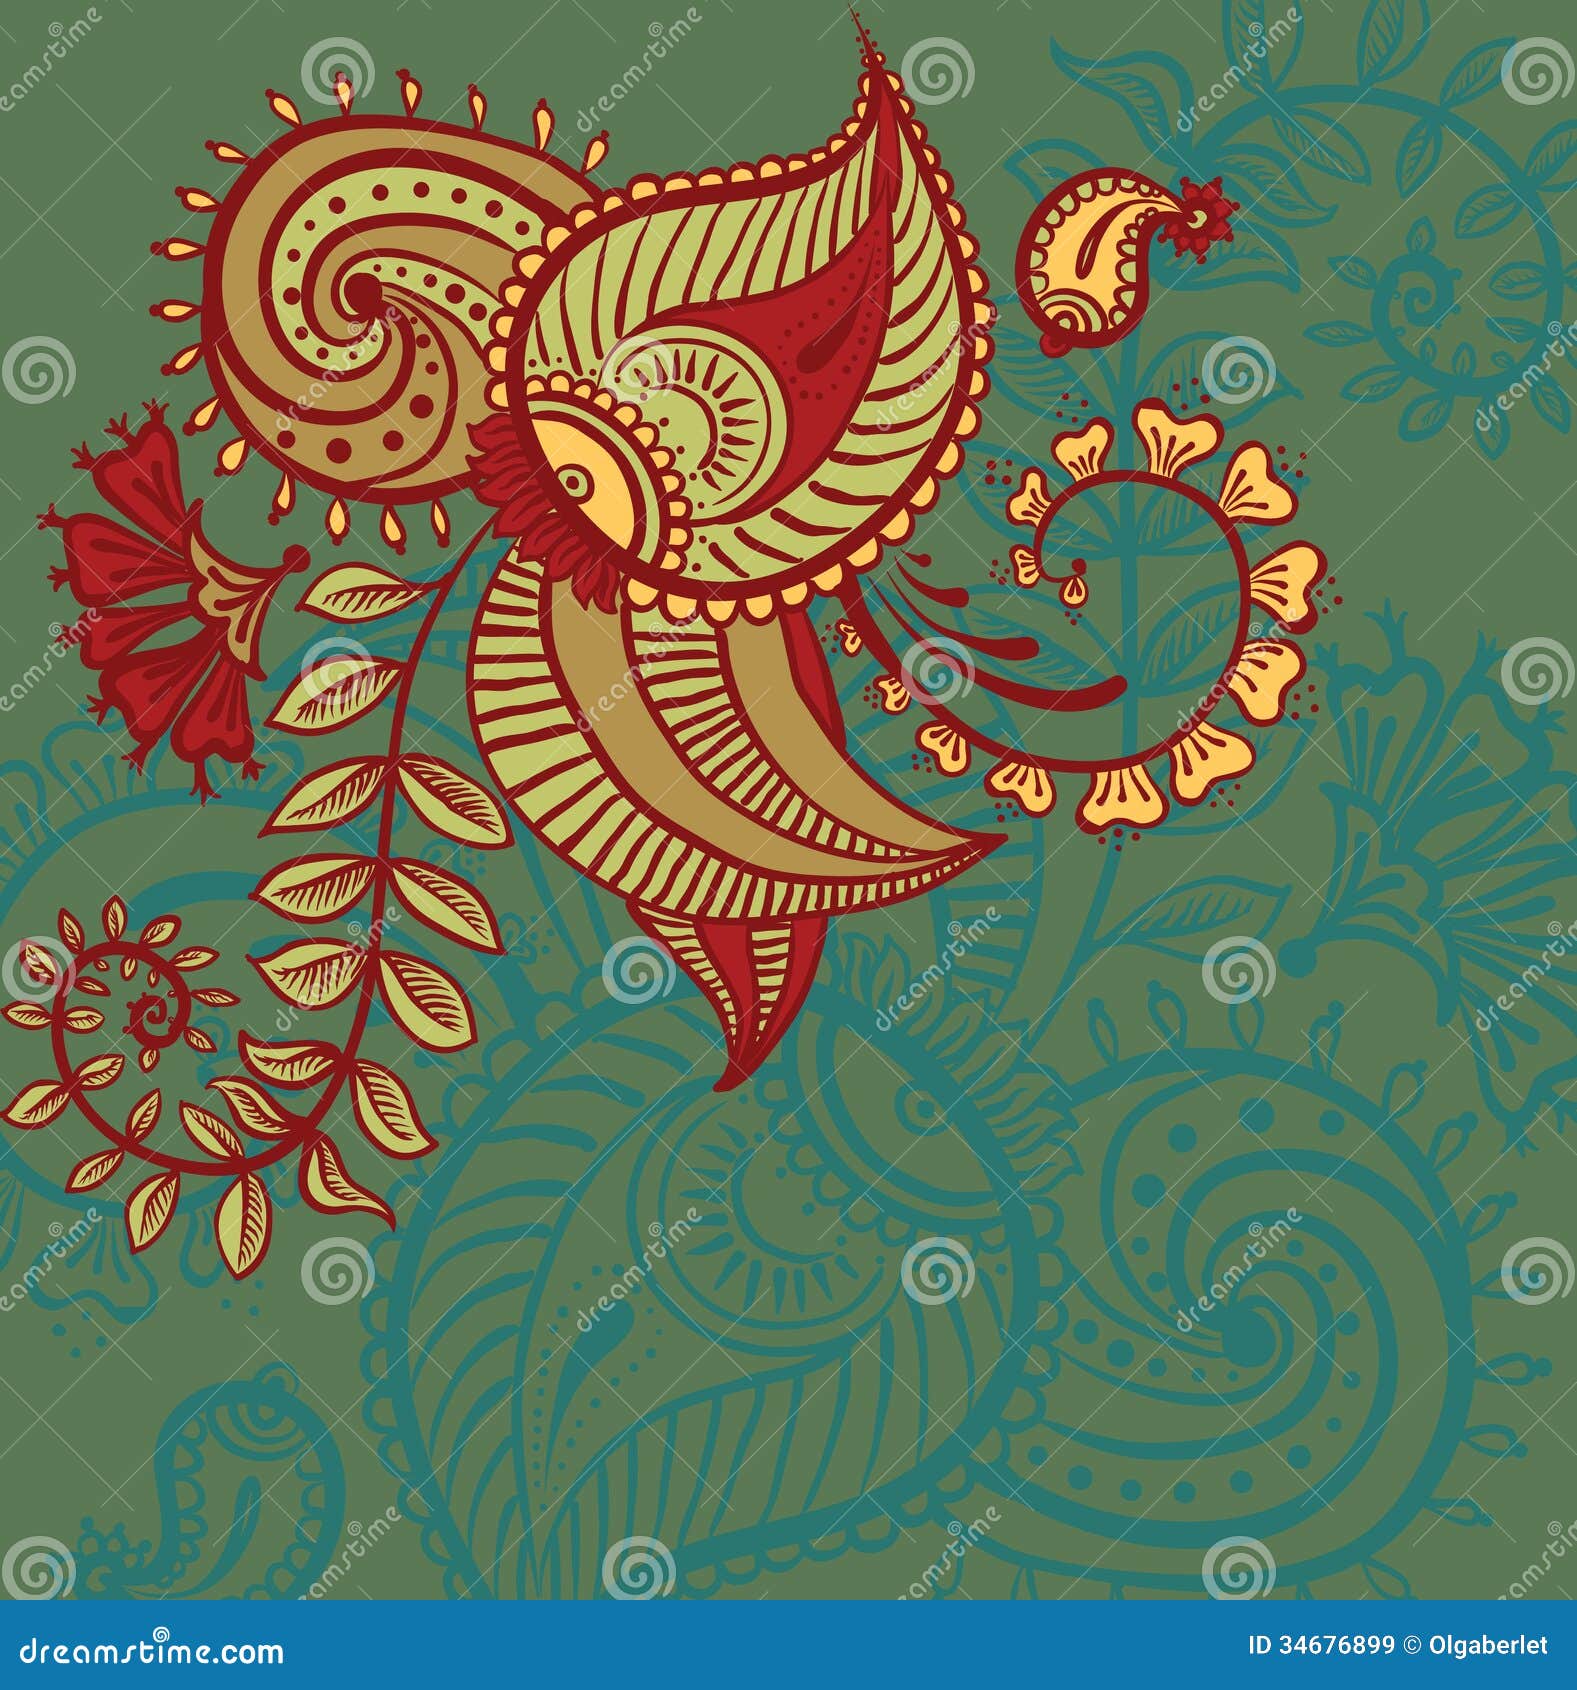 Floral paisley design stock vector. Illustration of element - 34676899